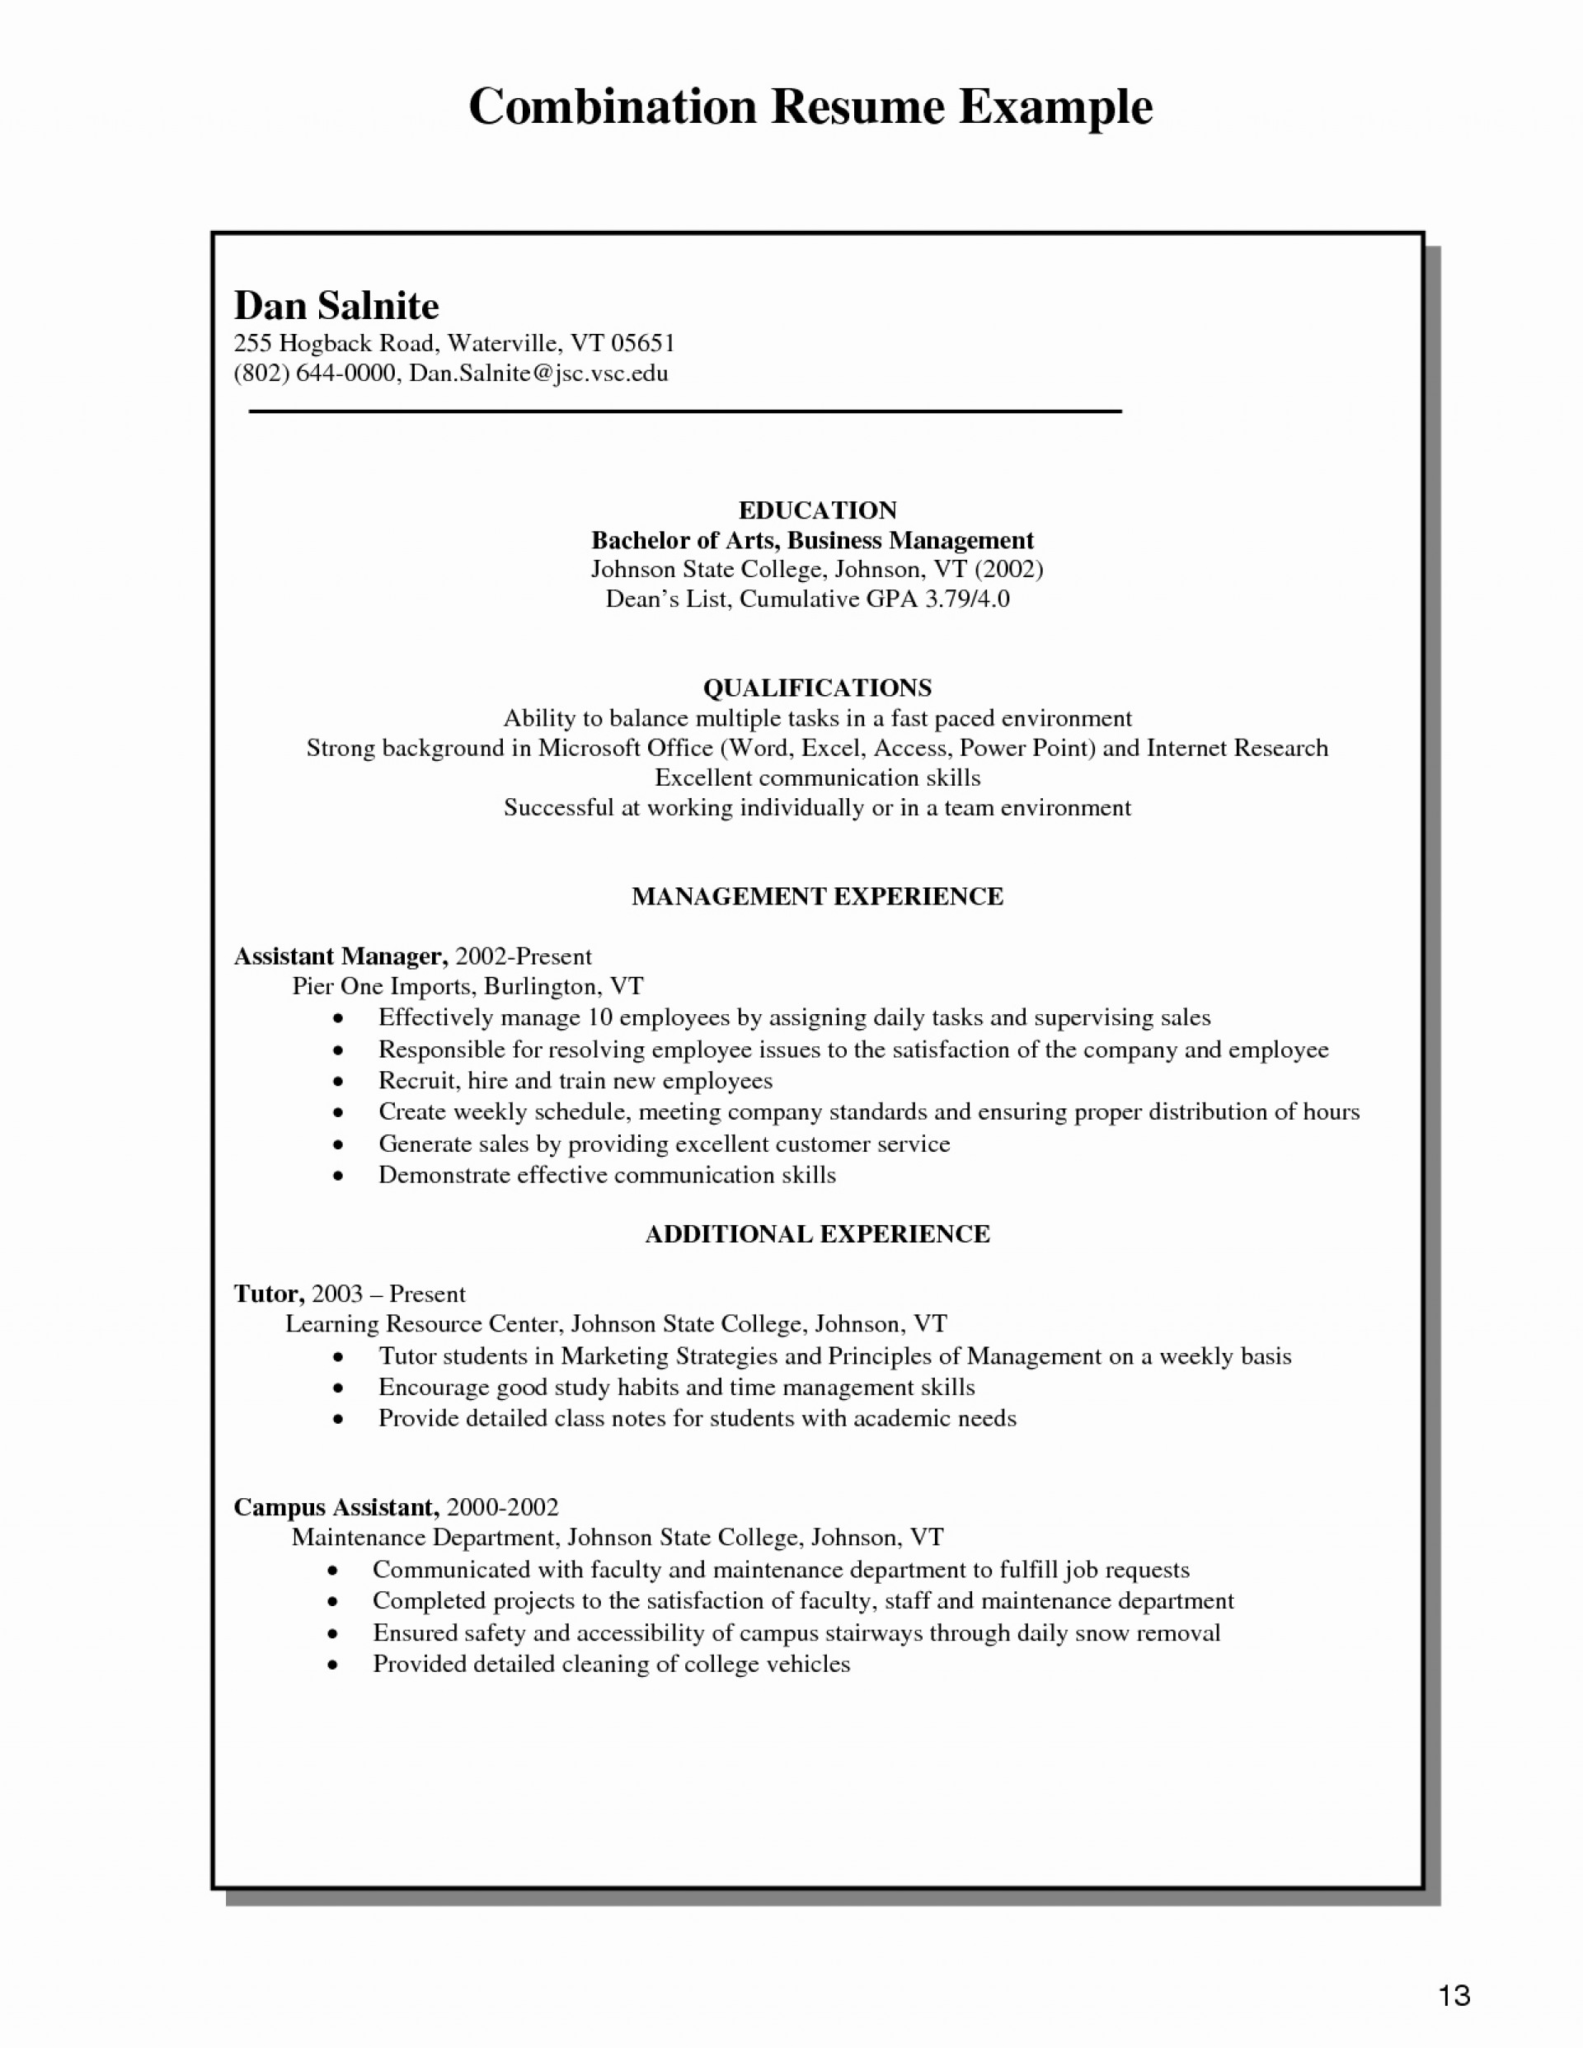 Combination Resume Word Template